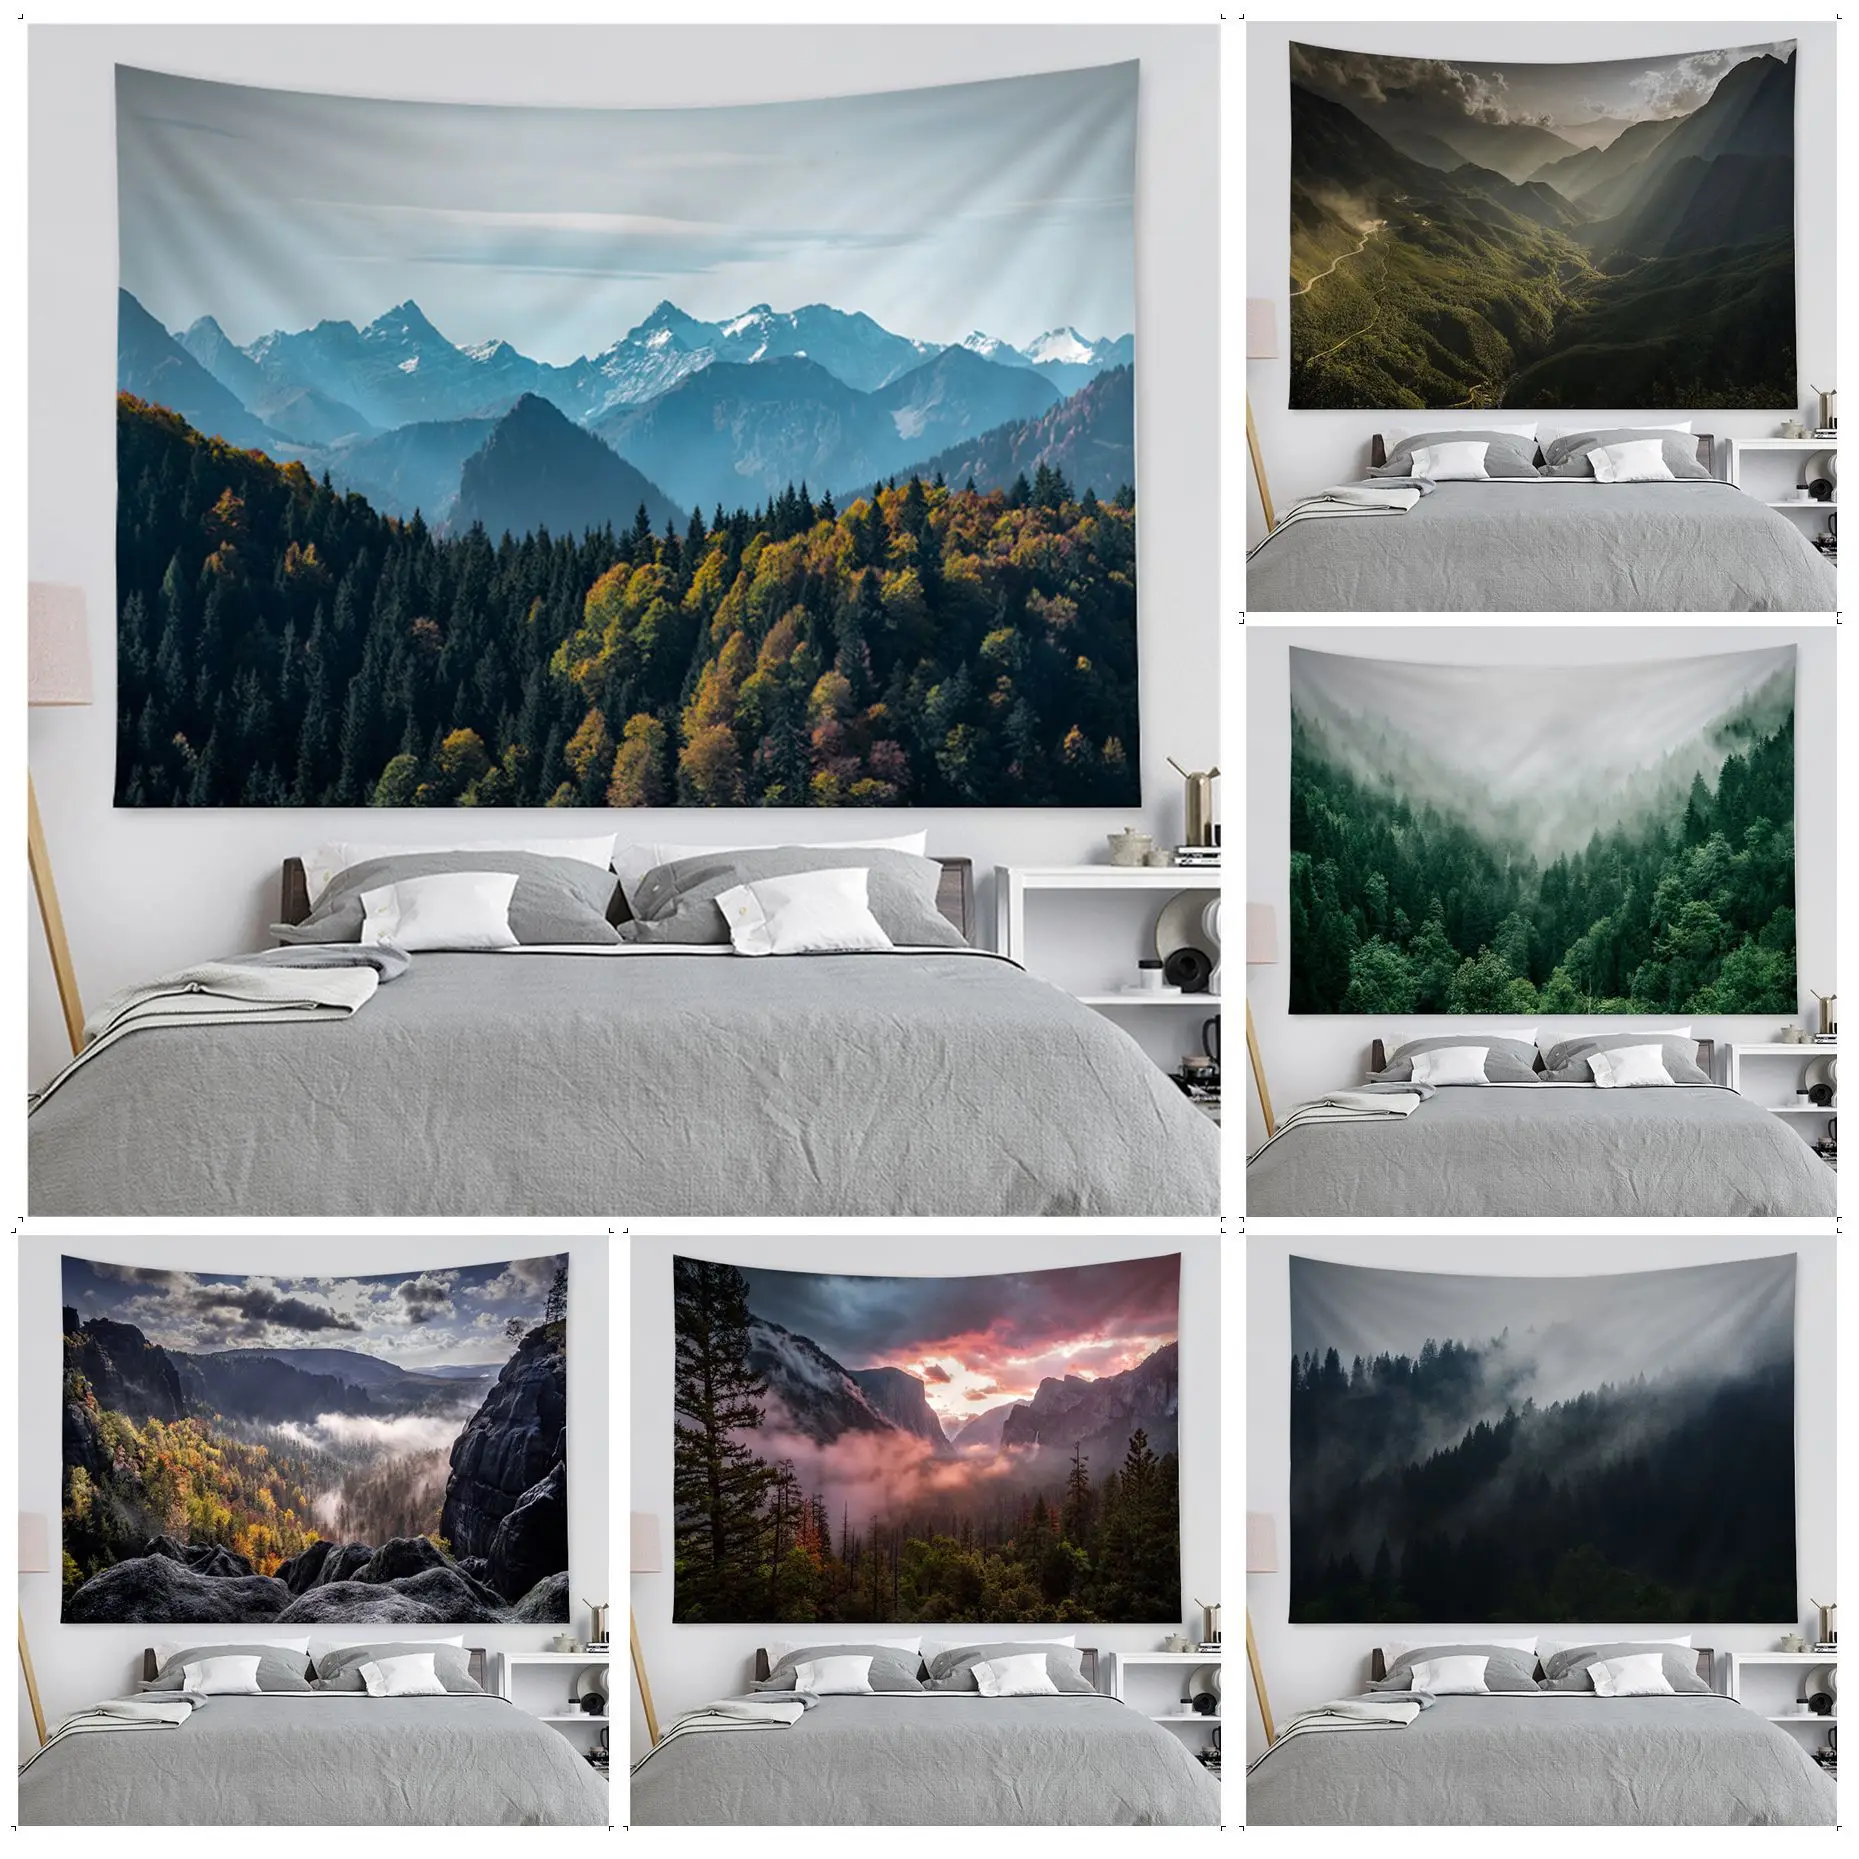 

Forest Mountain Tapestry Anime Tapestry Hanging Tarot Hippie Wall Rugs Dorm Home Decor